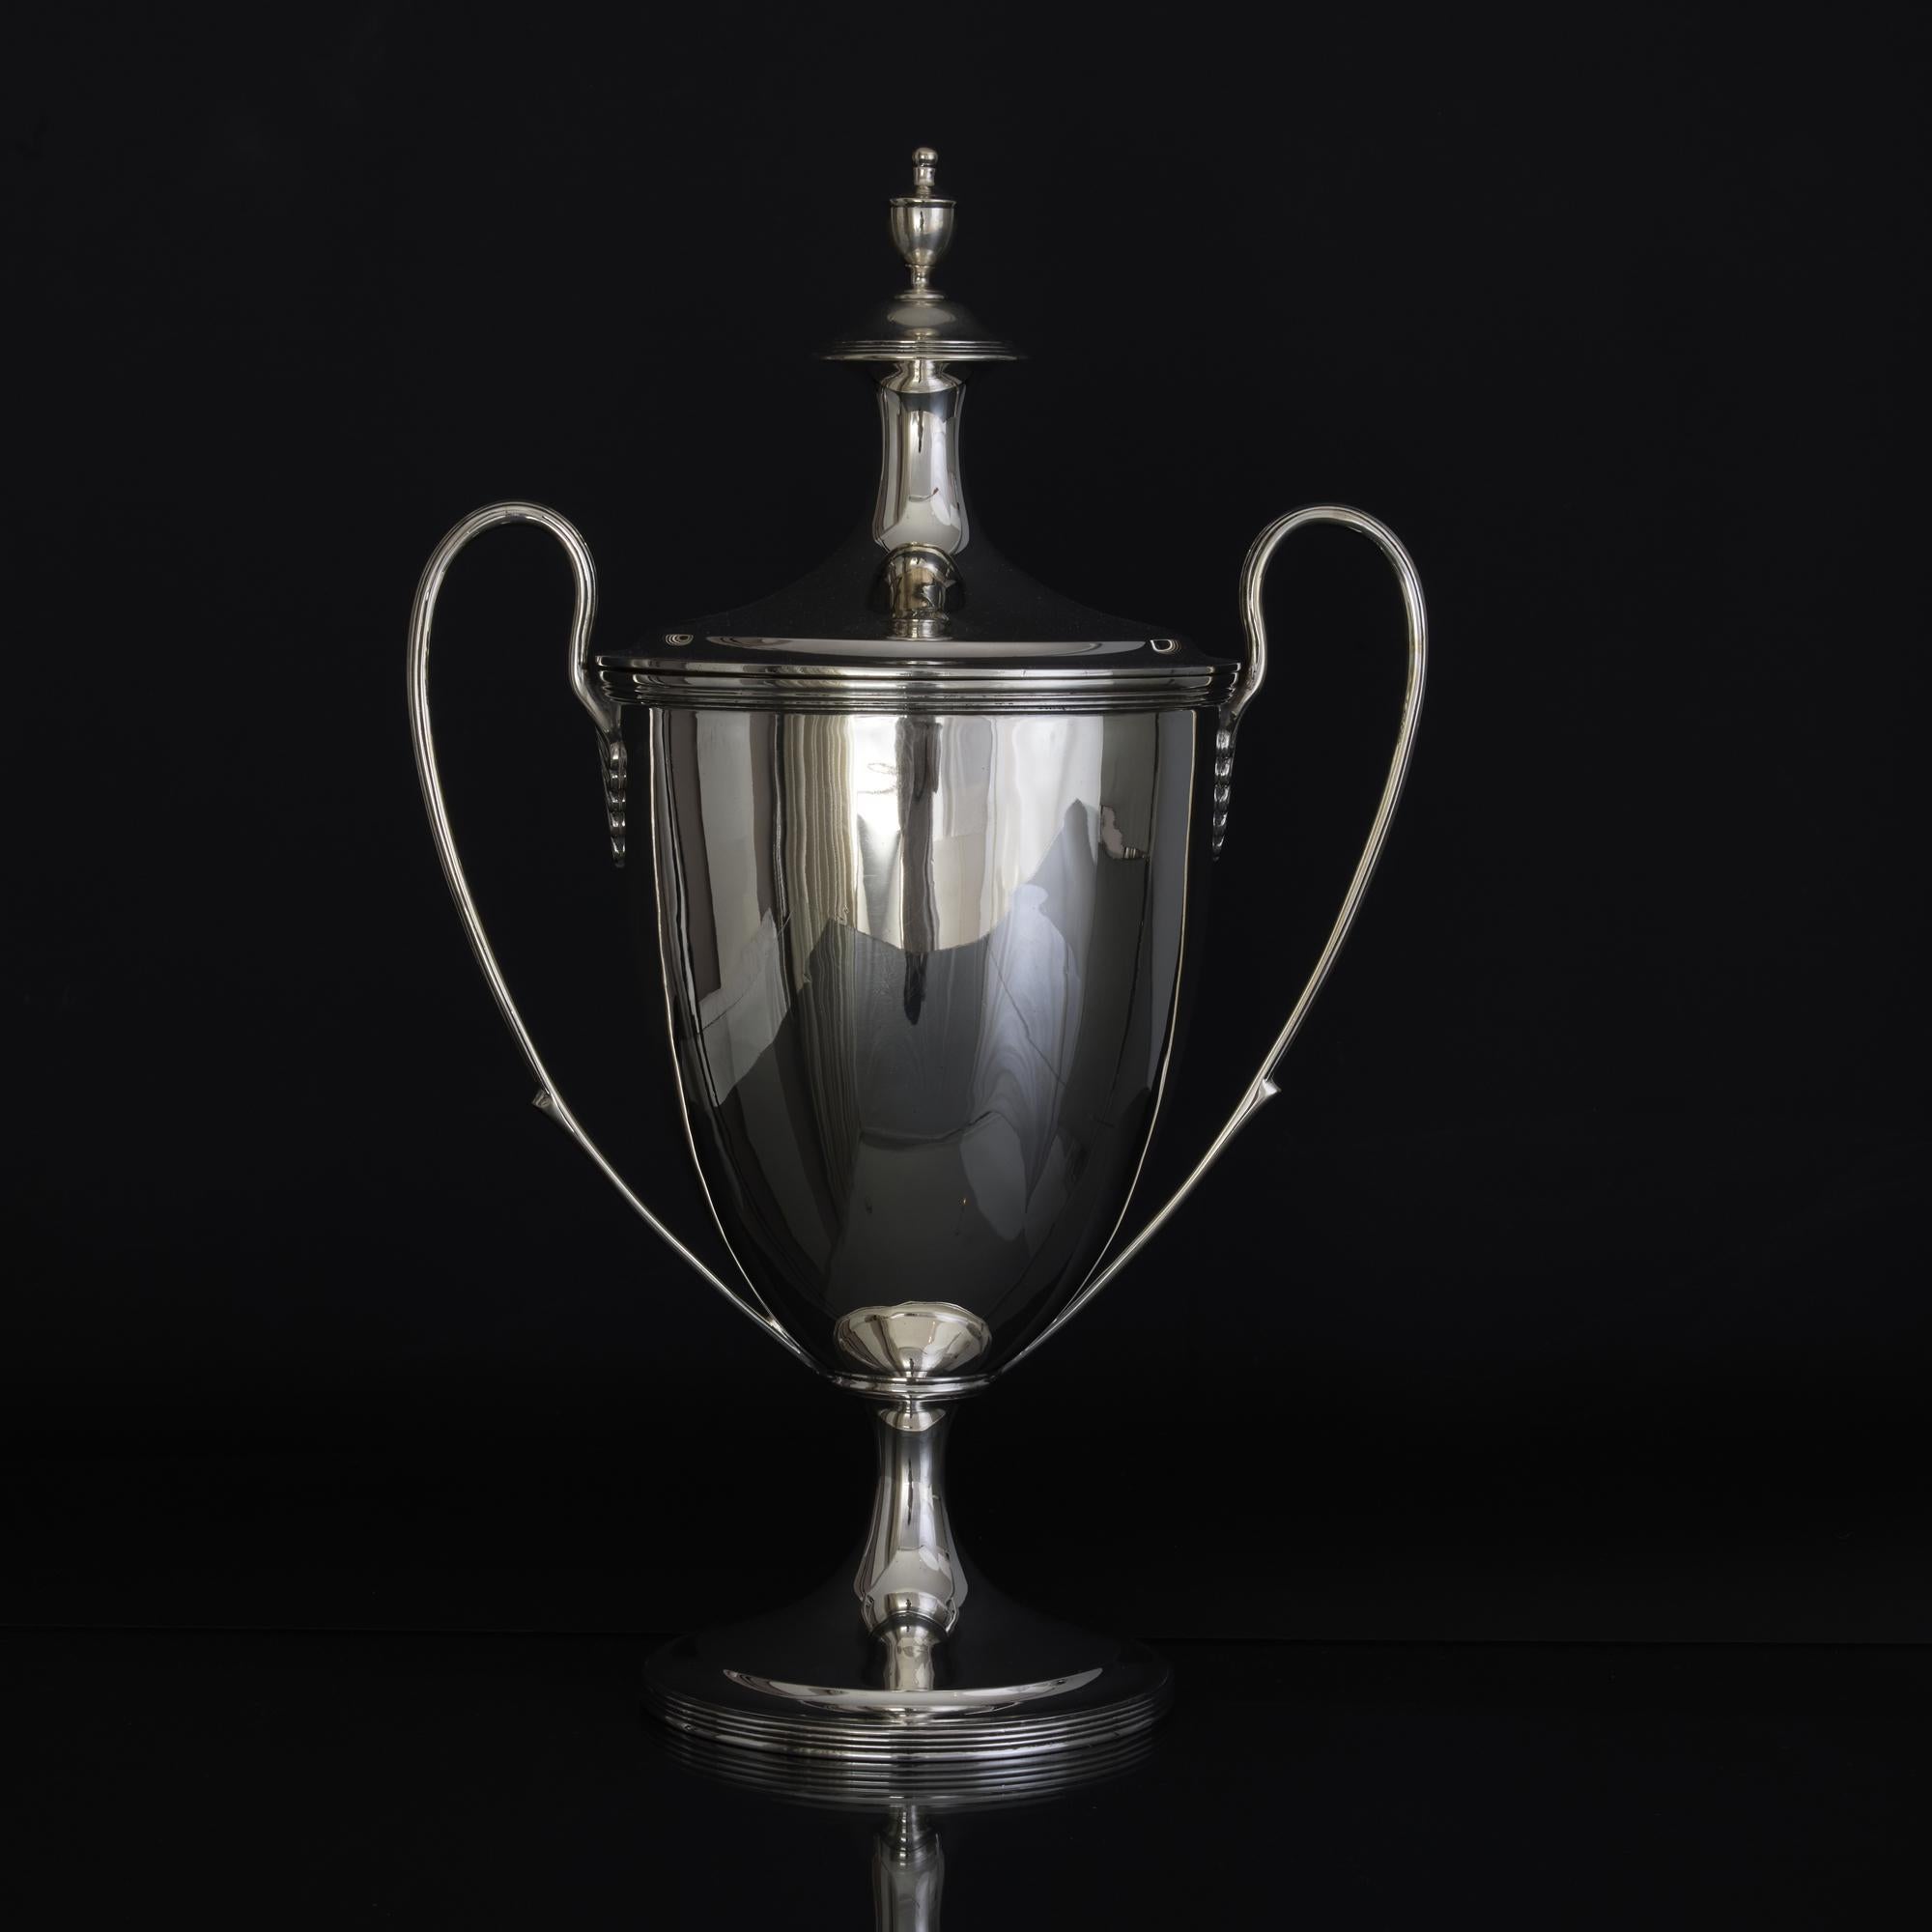 Elegant urn-shaped silver trophy cup and cover in the restrained and graceful neoclassical Adam style with long sweeping handles decorated with a fine thread pattern decoration. Bands of thread decoration surround the body and the spreading silver